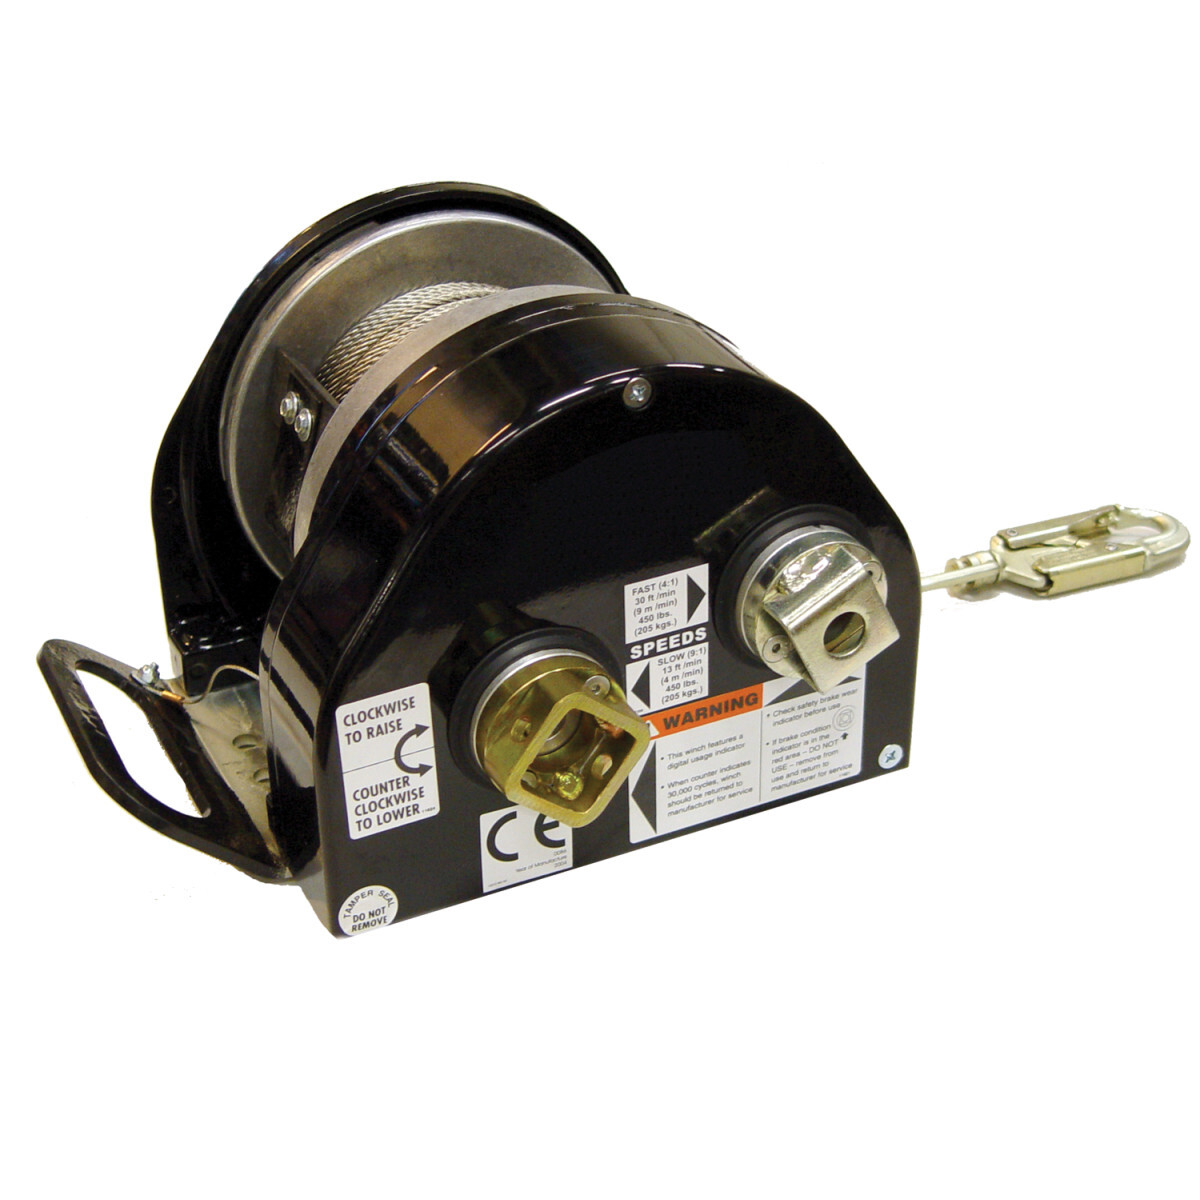 3M™ DBI-SALA® Confined Space Winch, Power Drive 8518586